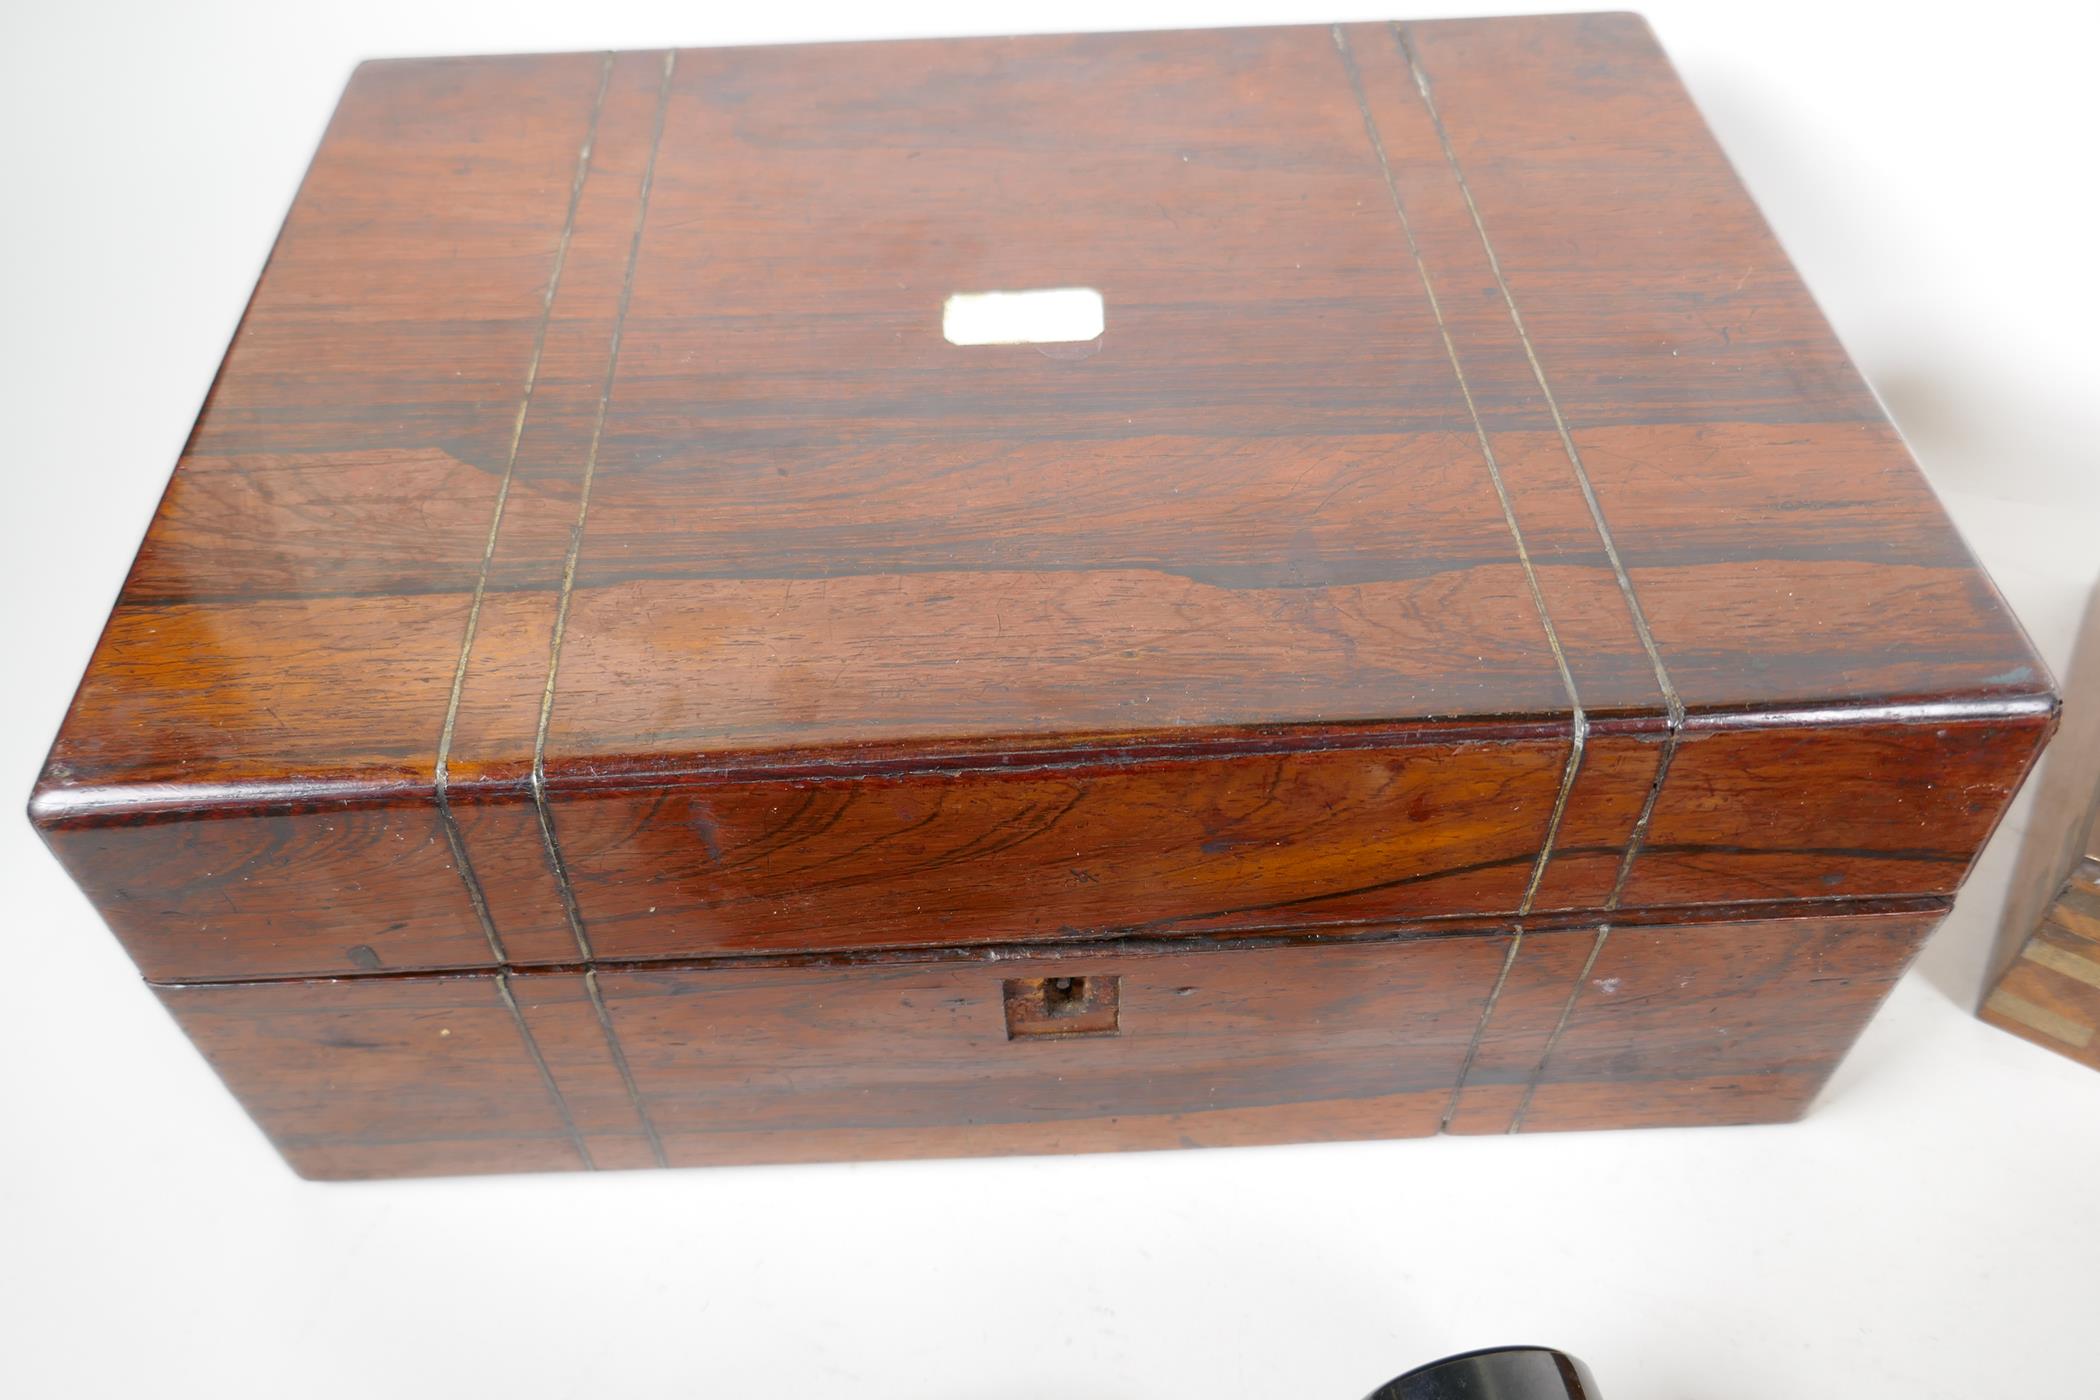 A C19th rosewood vanity box, A/F, 12" x 9" x 5", together with a small brass bound trinket box and a - Image 3 of 5